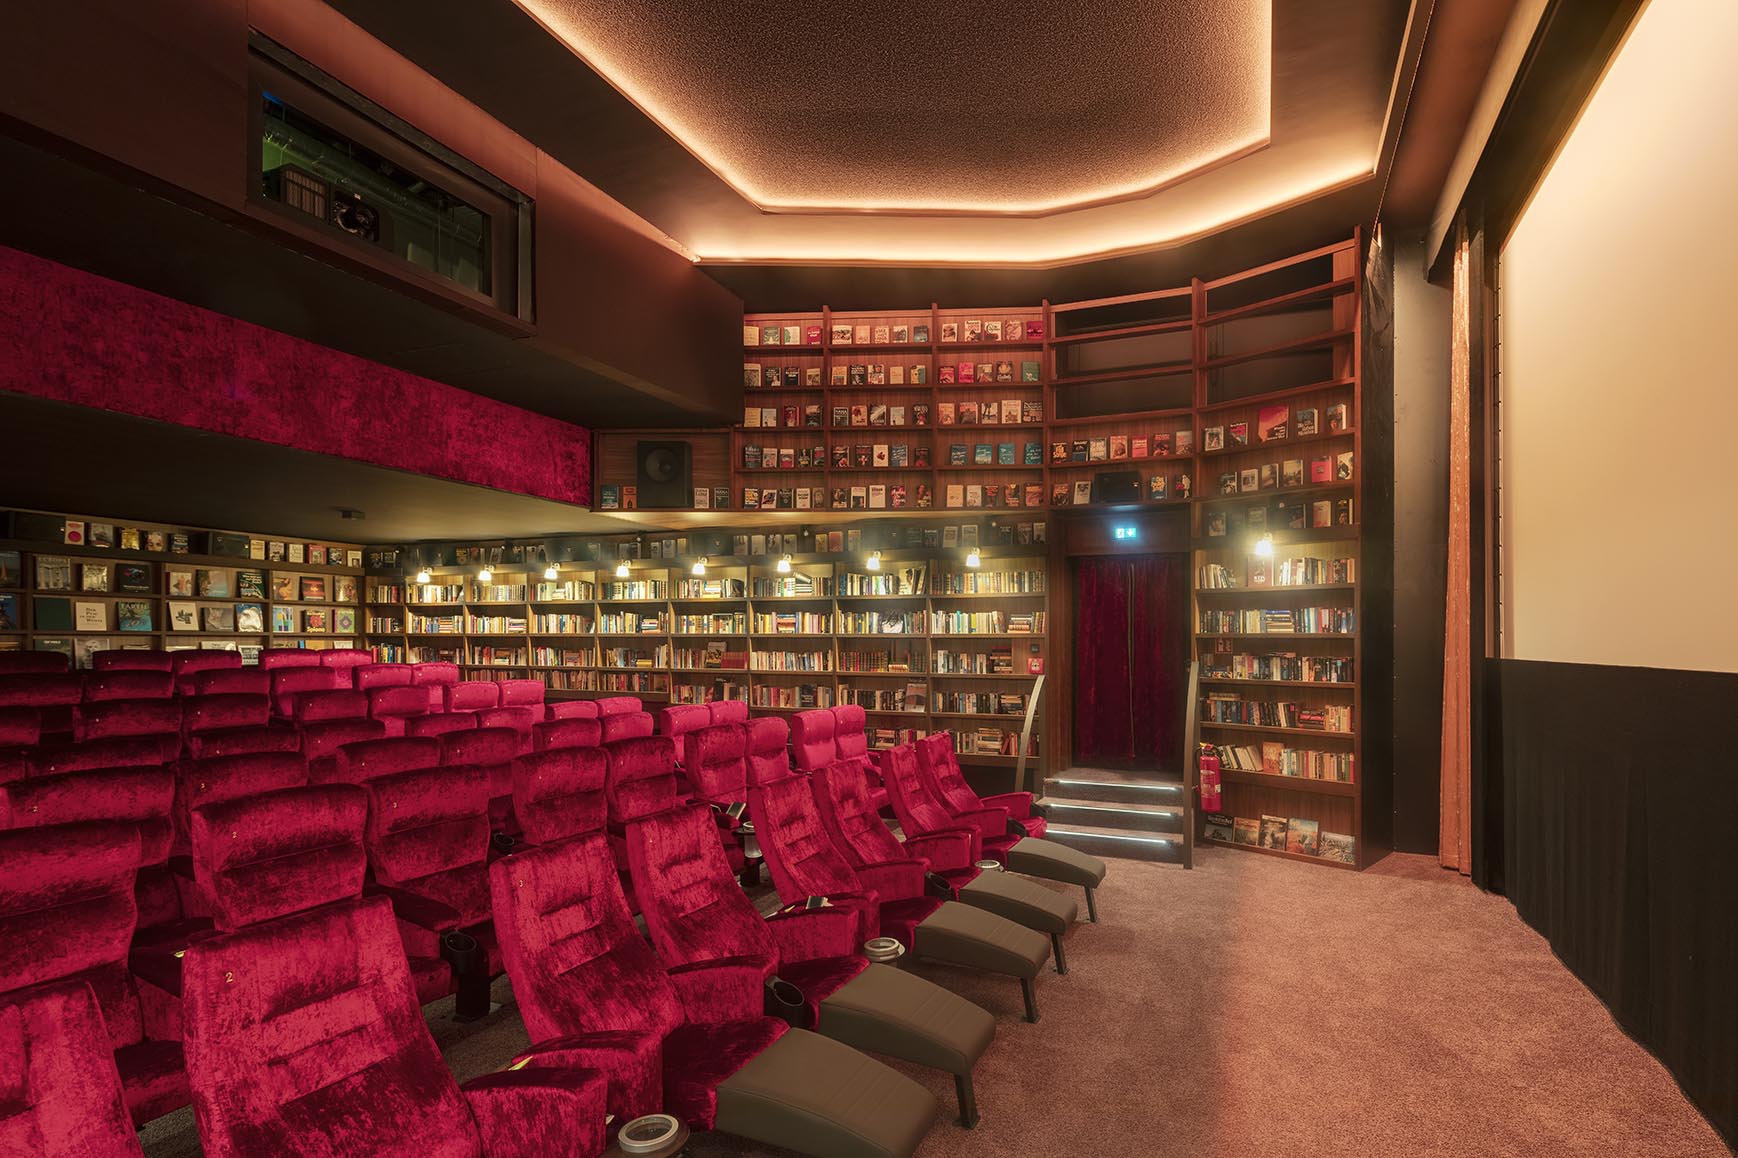 If cinema, then like this! The ASTOR Film Lounge at the ARRI